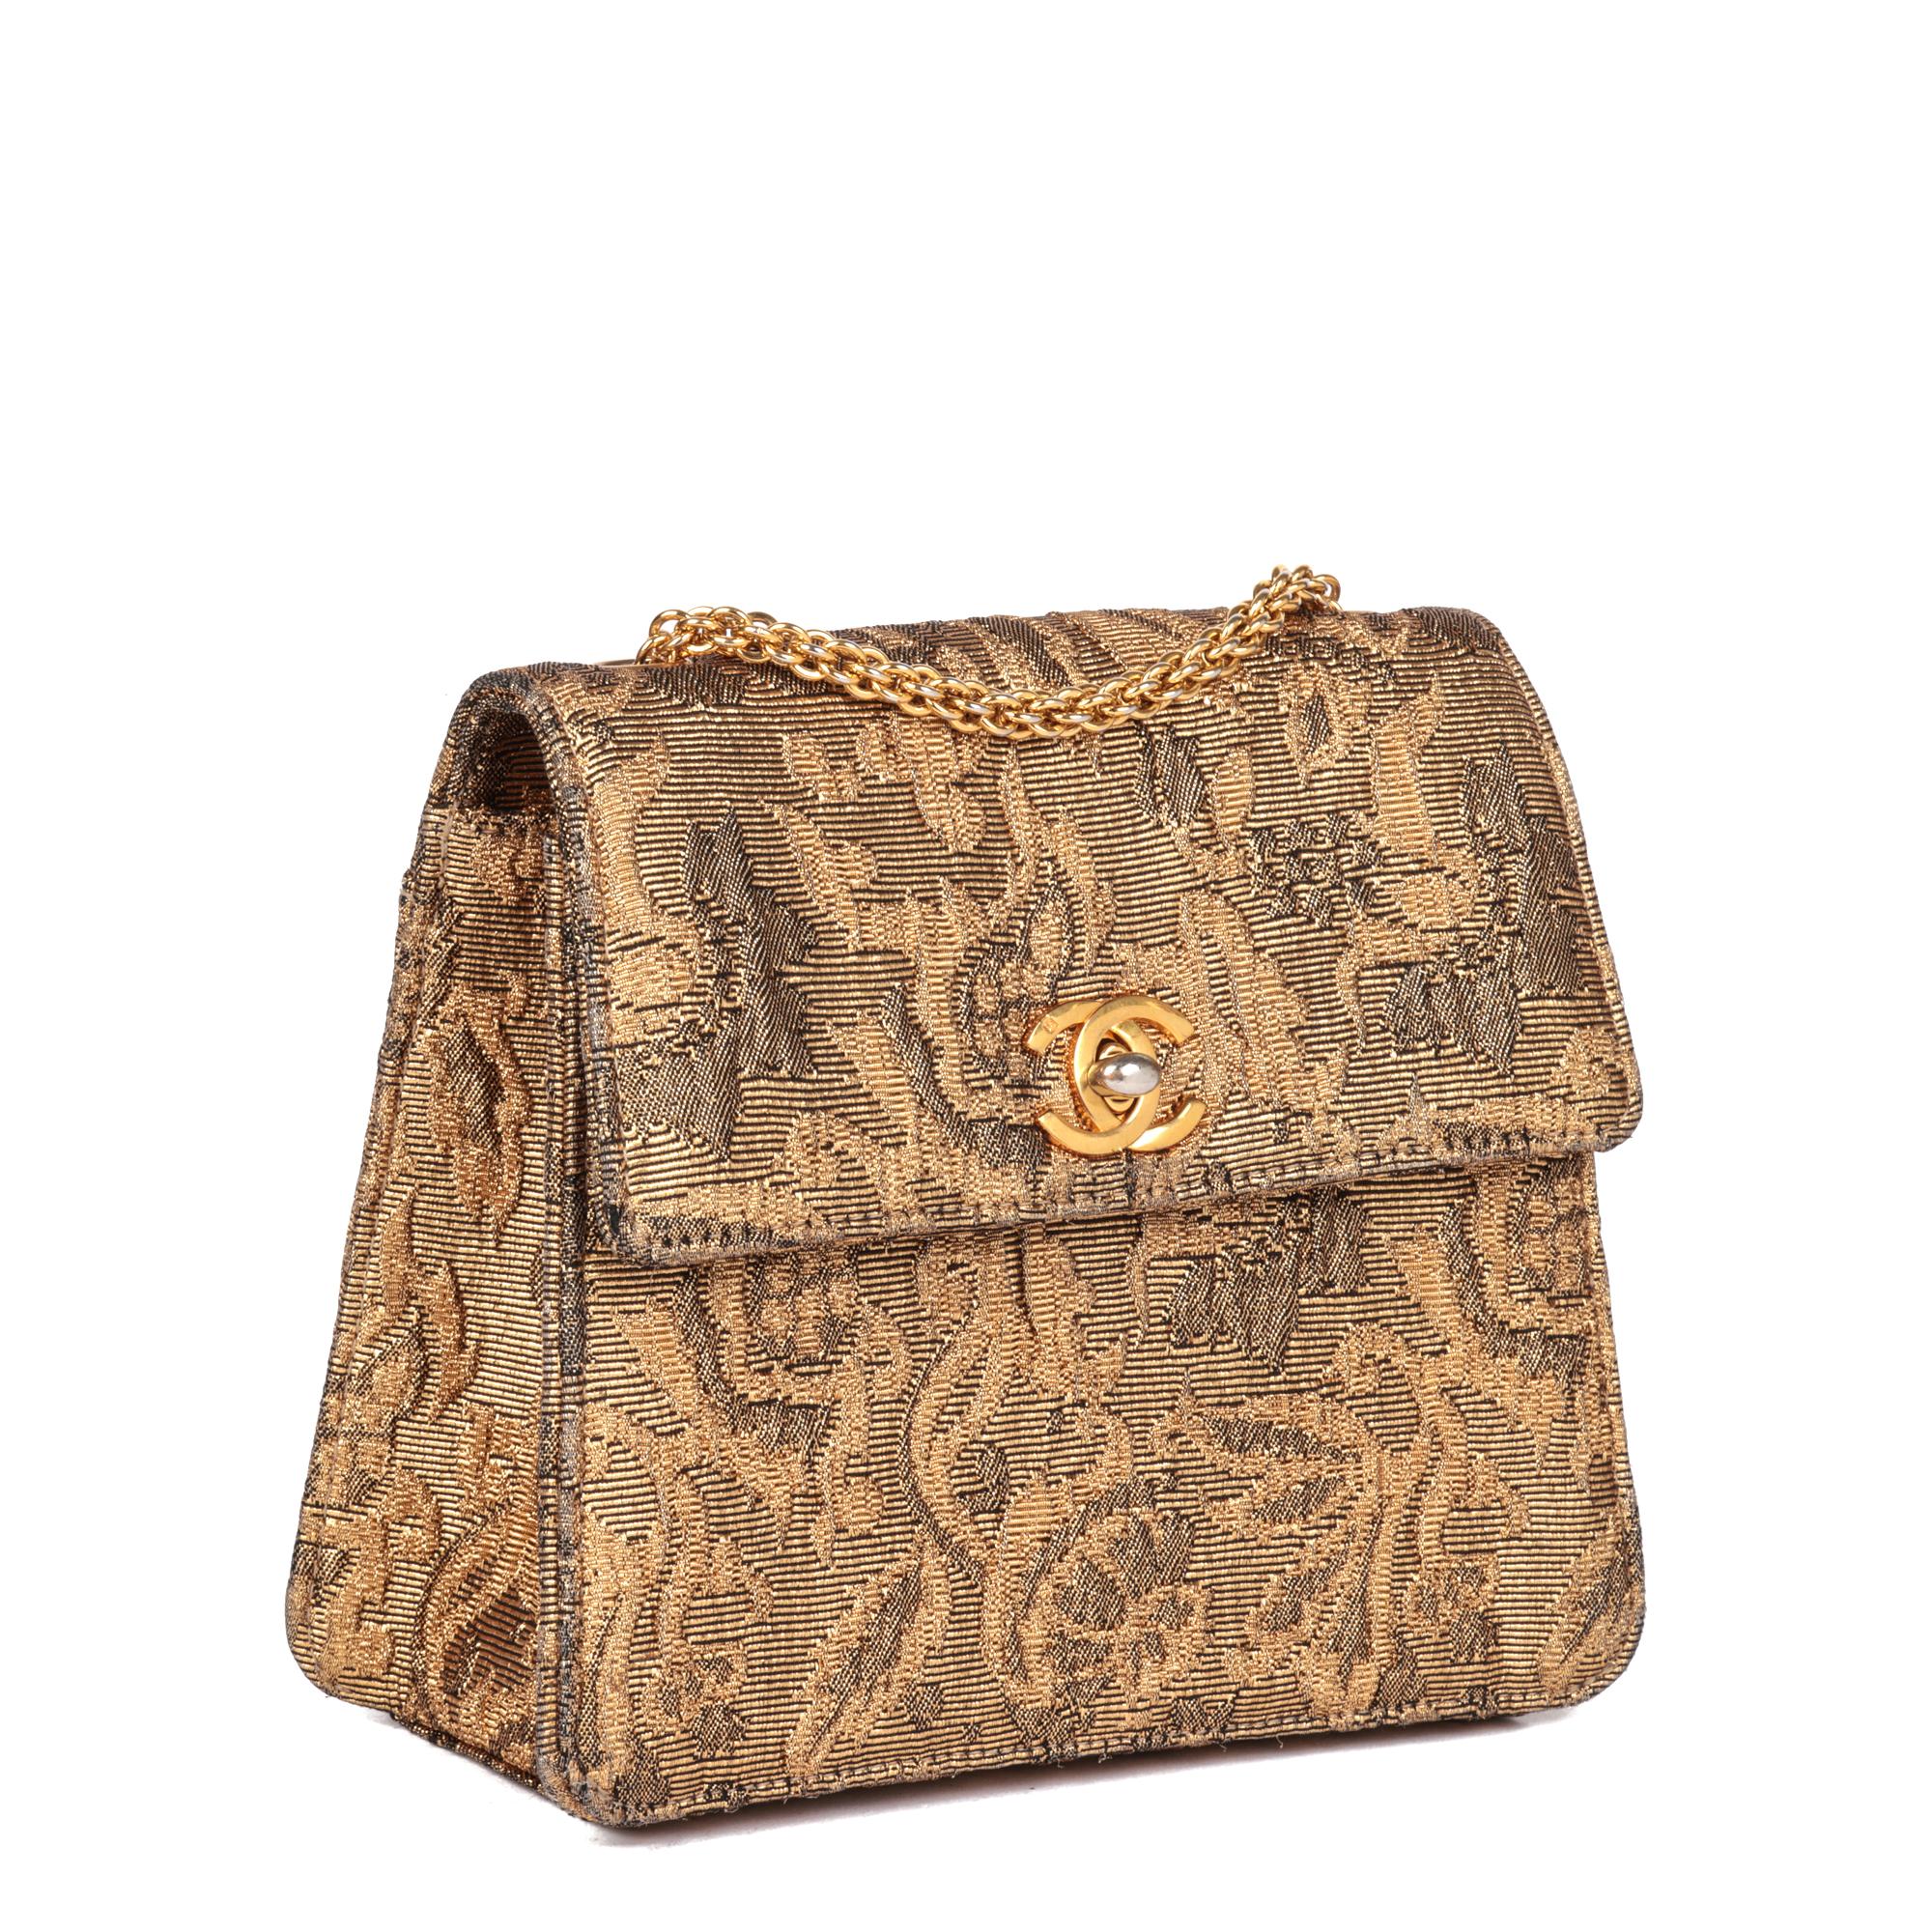 CHANEL
Gold Metallic Floral Woven Jacquard Vintage Mini Flap Bag

Serial Number: 5146600
Age (Circa): 1997
Accompanied By: Chanel Dust Bag, Authenticity Card, Care Booklet
Authenticity Details: Authenticity Card, Serial Sticker (Made in